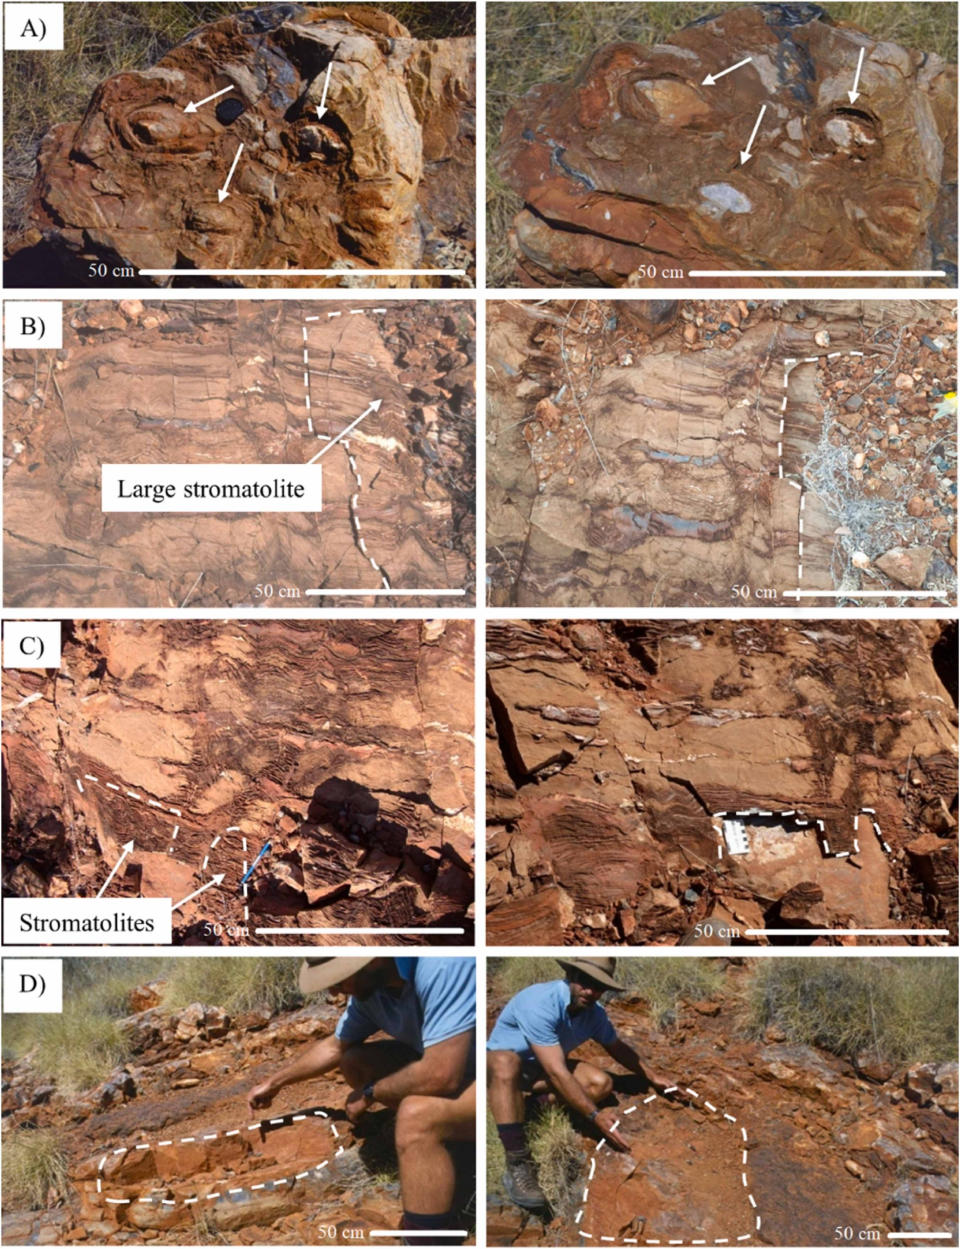 Eight panels in two columns of four all show rust-red rock formations with arrows and lines pointing to different features.